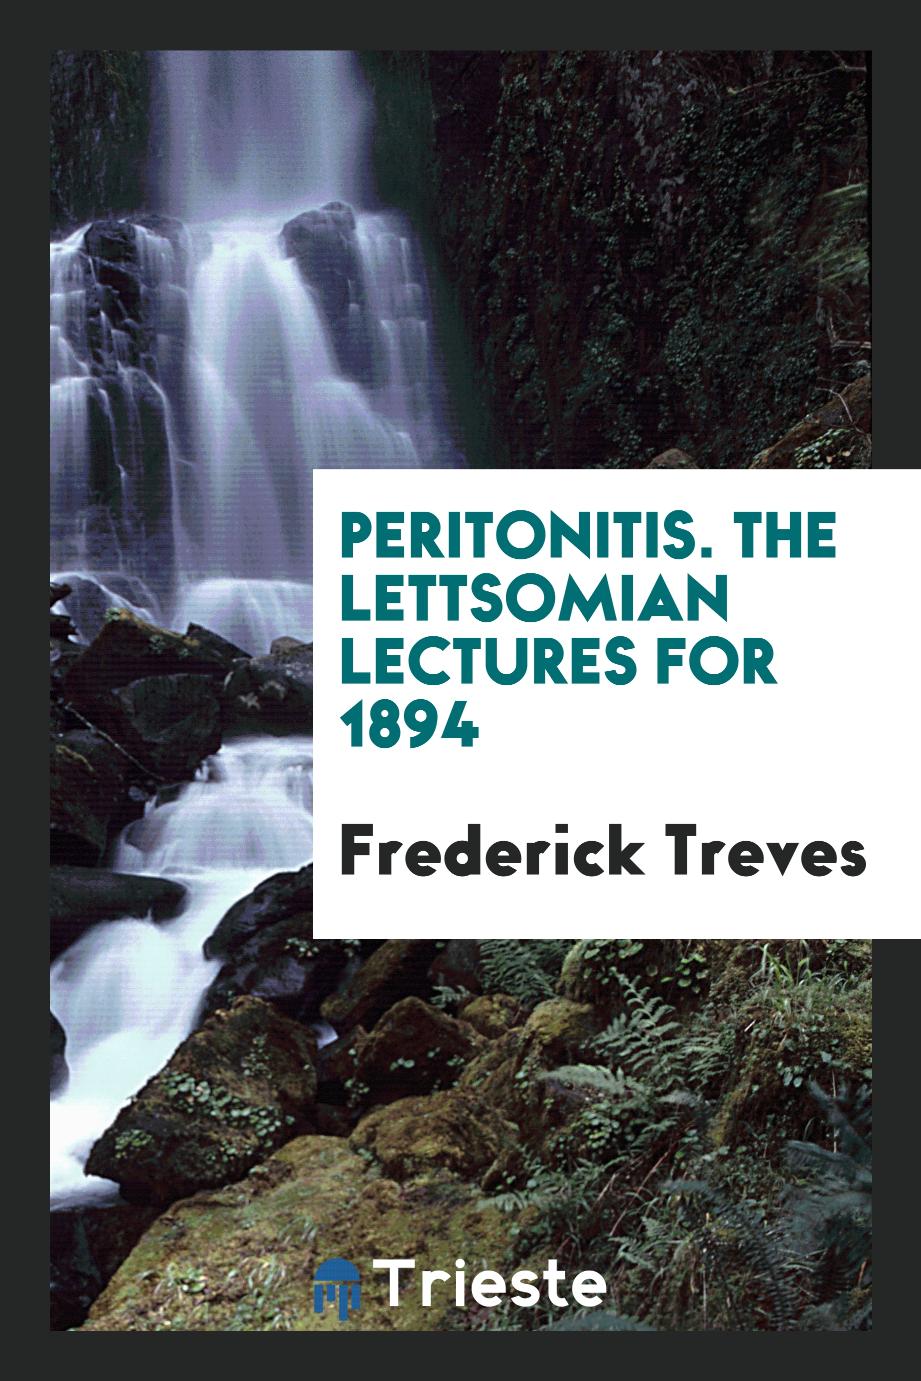 Peritonitis. The Lettsomian Lectures for 1894